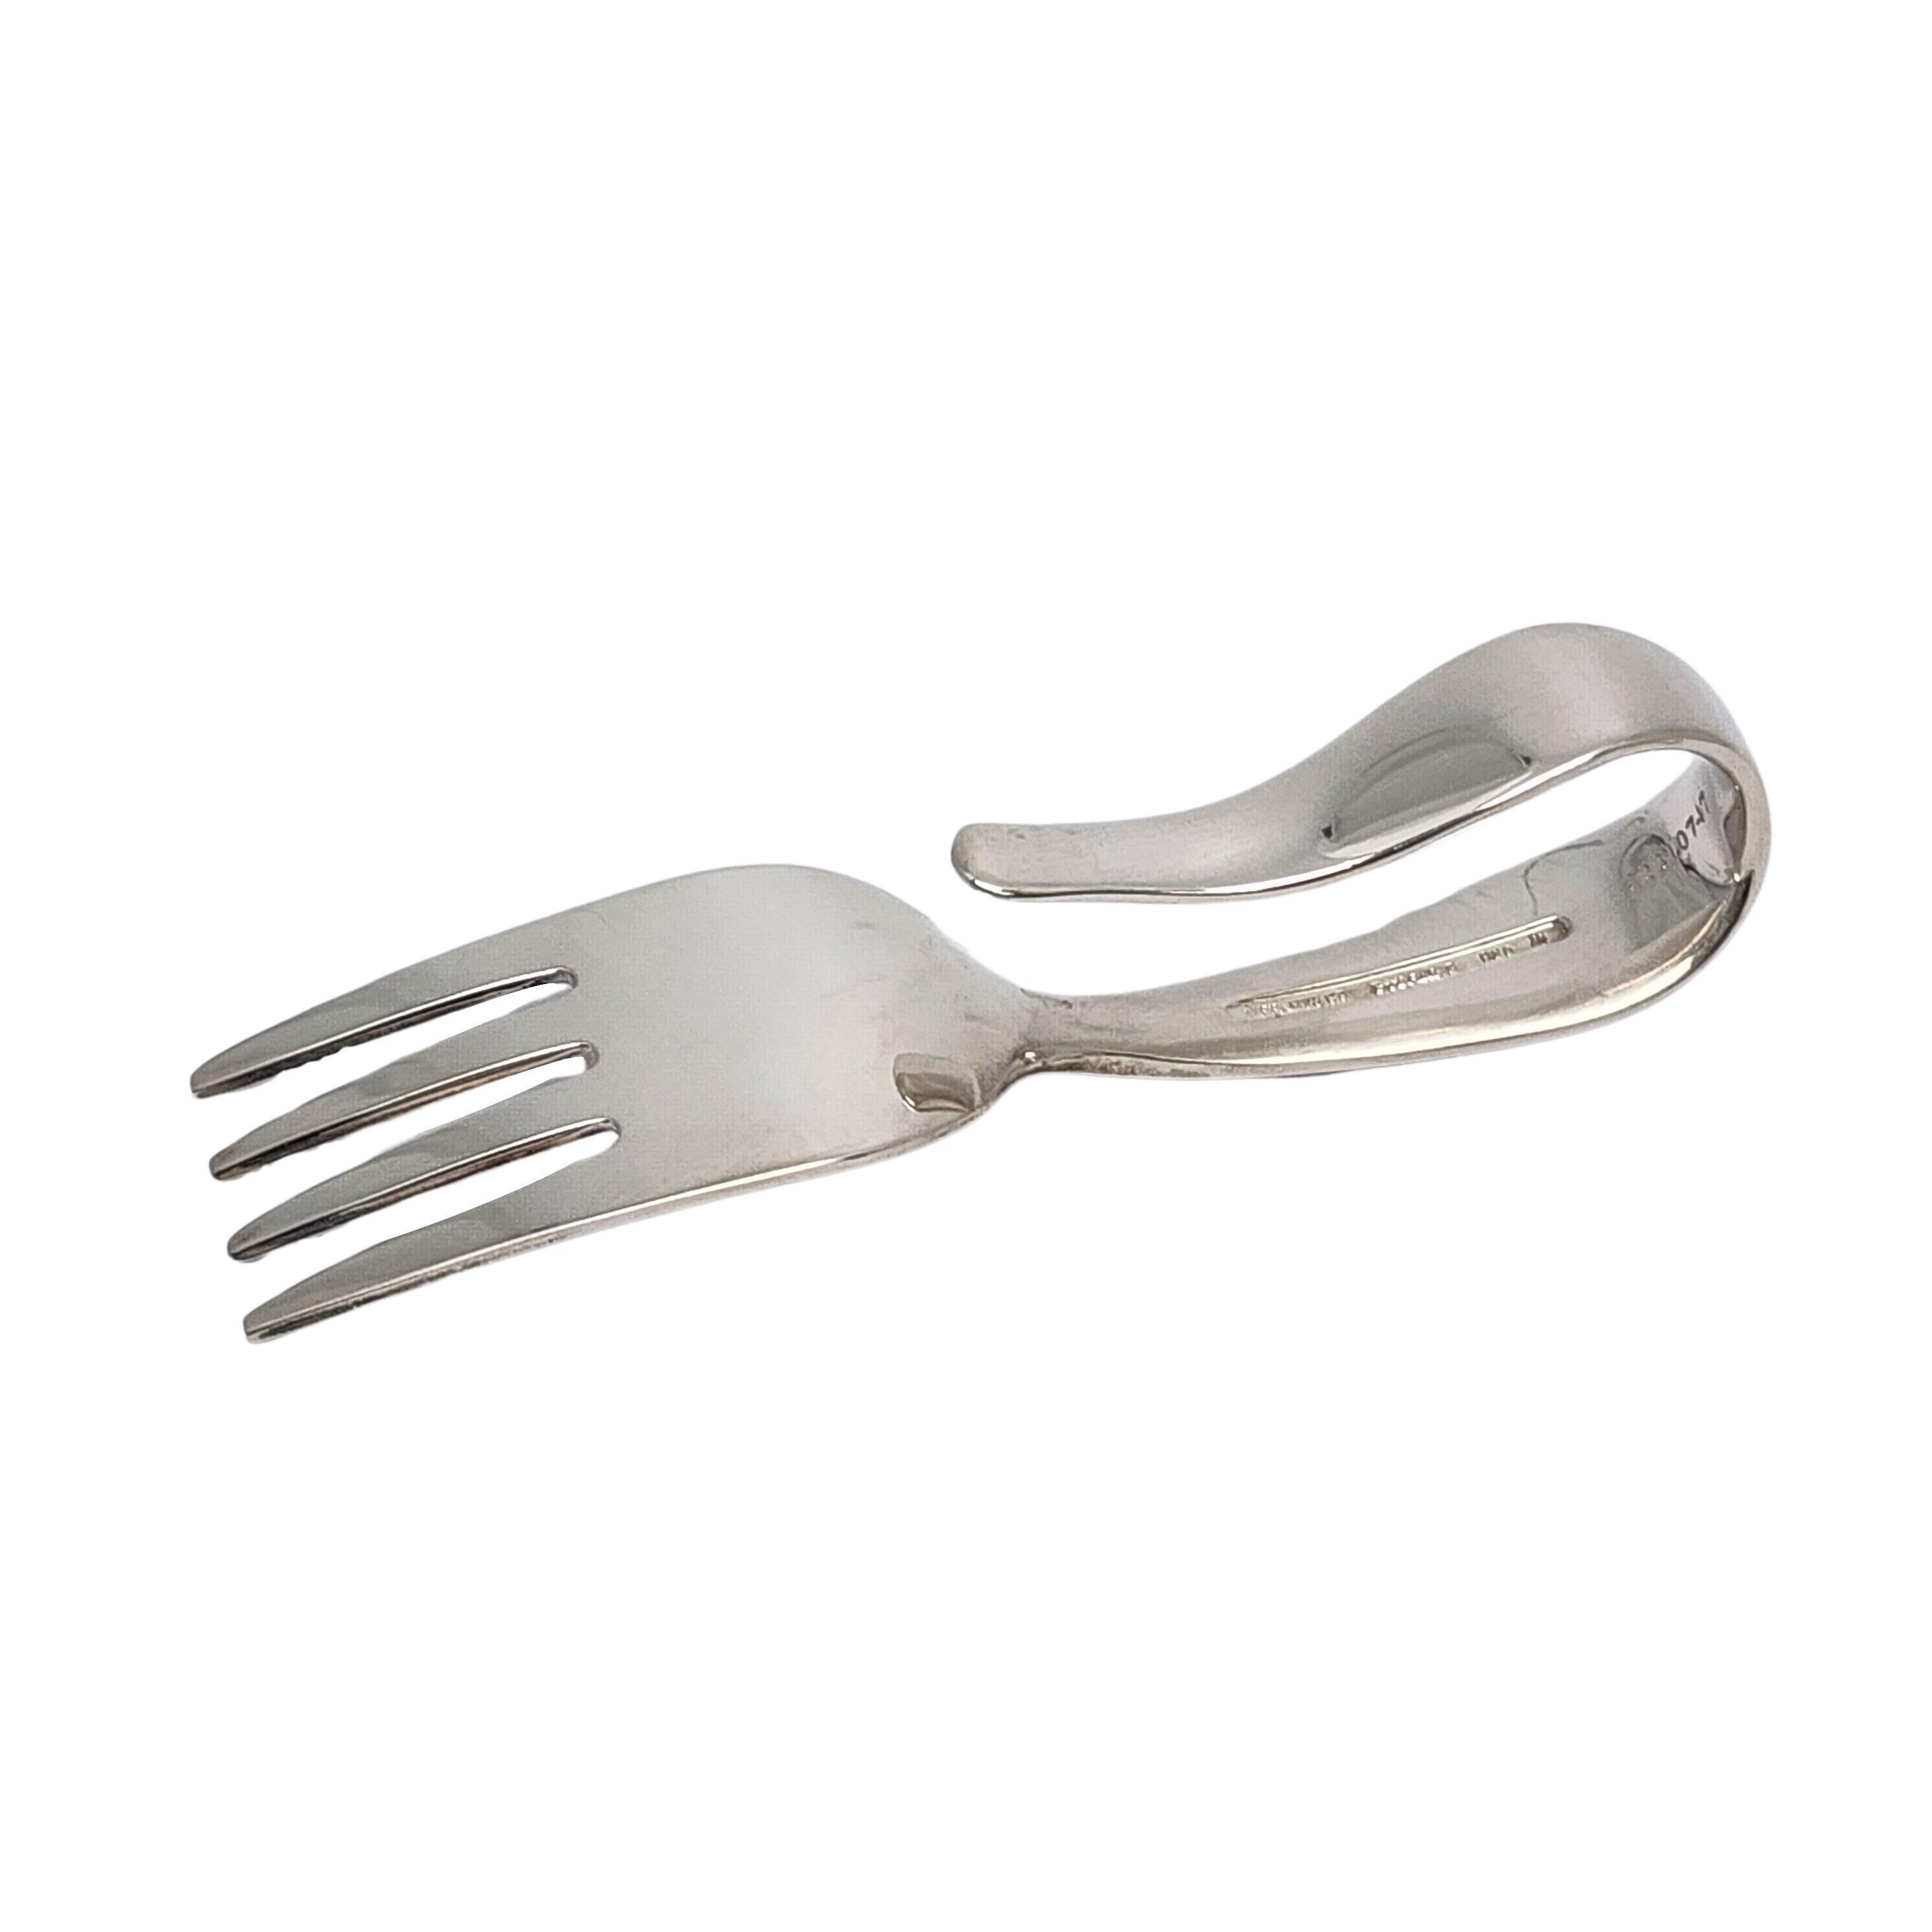 Sterling silver baby fork with curved loop handle by Tiffany & Co.

Timeless small baby/child feeding fork featuring a curved loop handle. Hallmarks date this piece to manufacture under the directorship of John C. Moore II, 1907-1947.  Does not